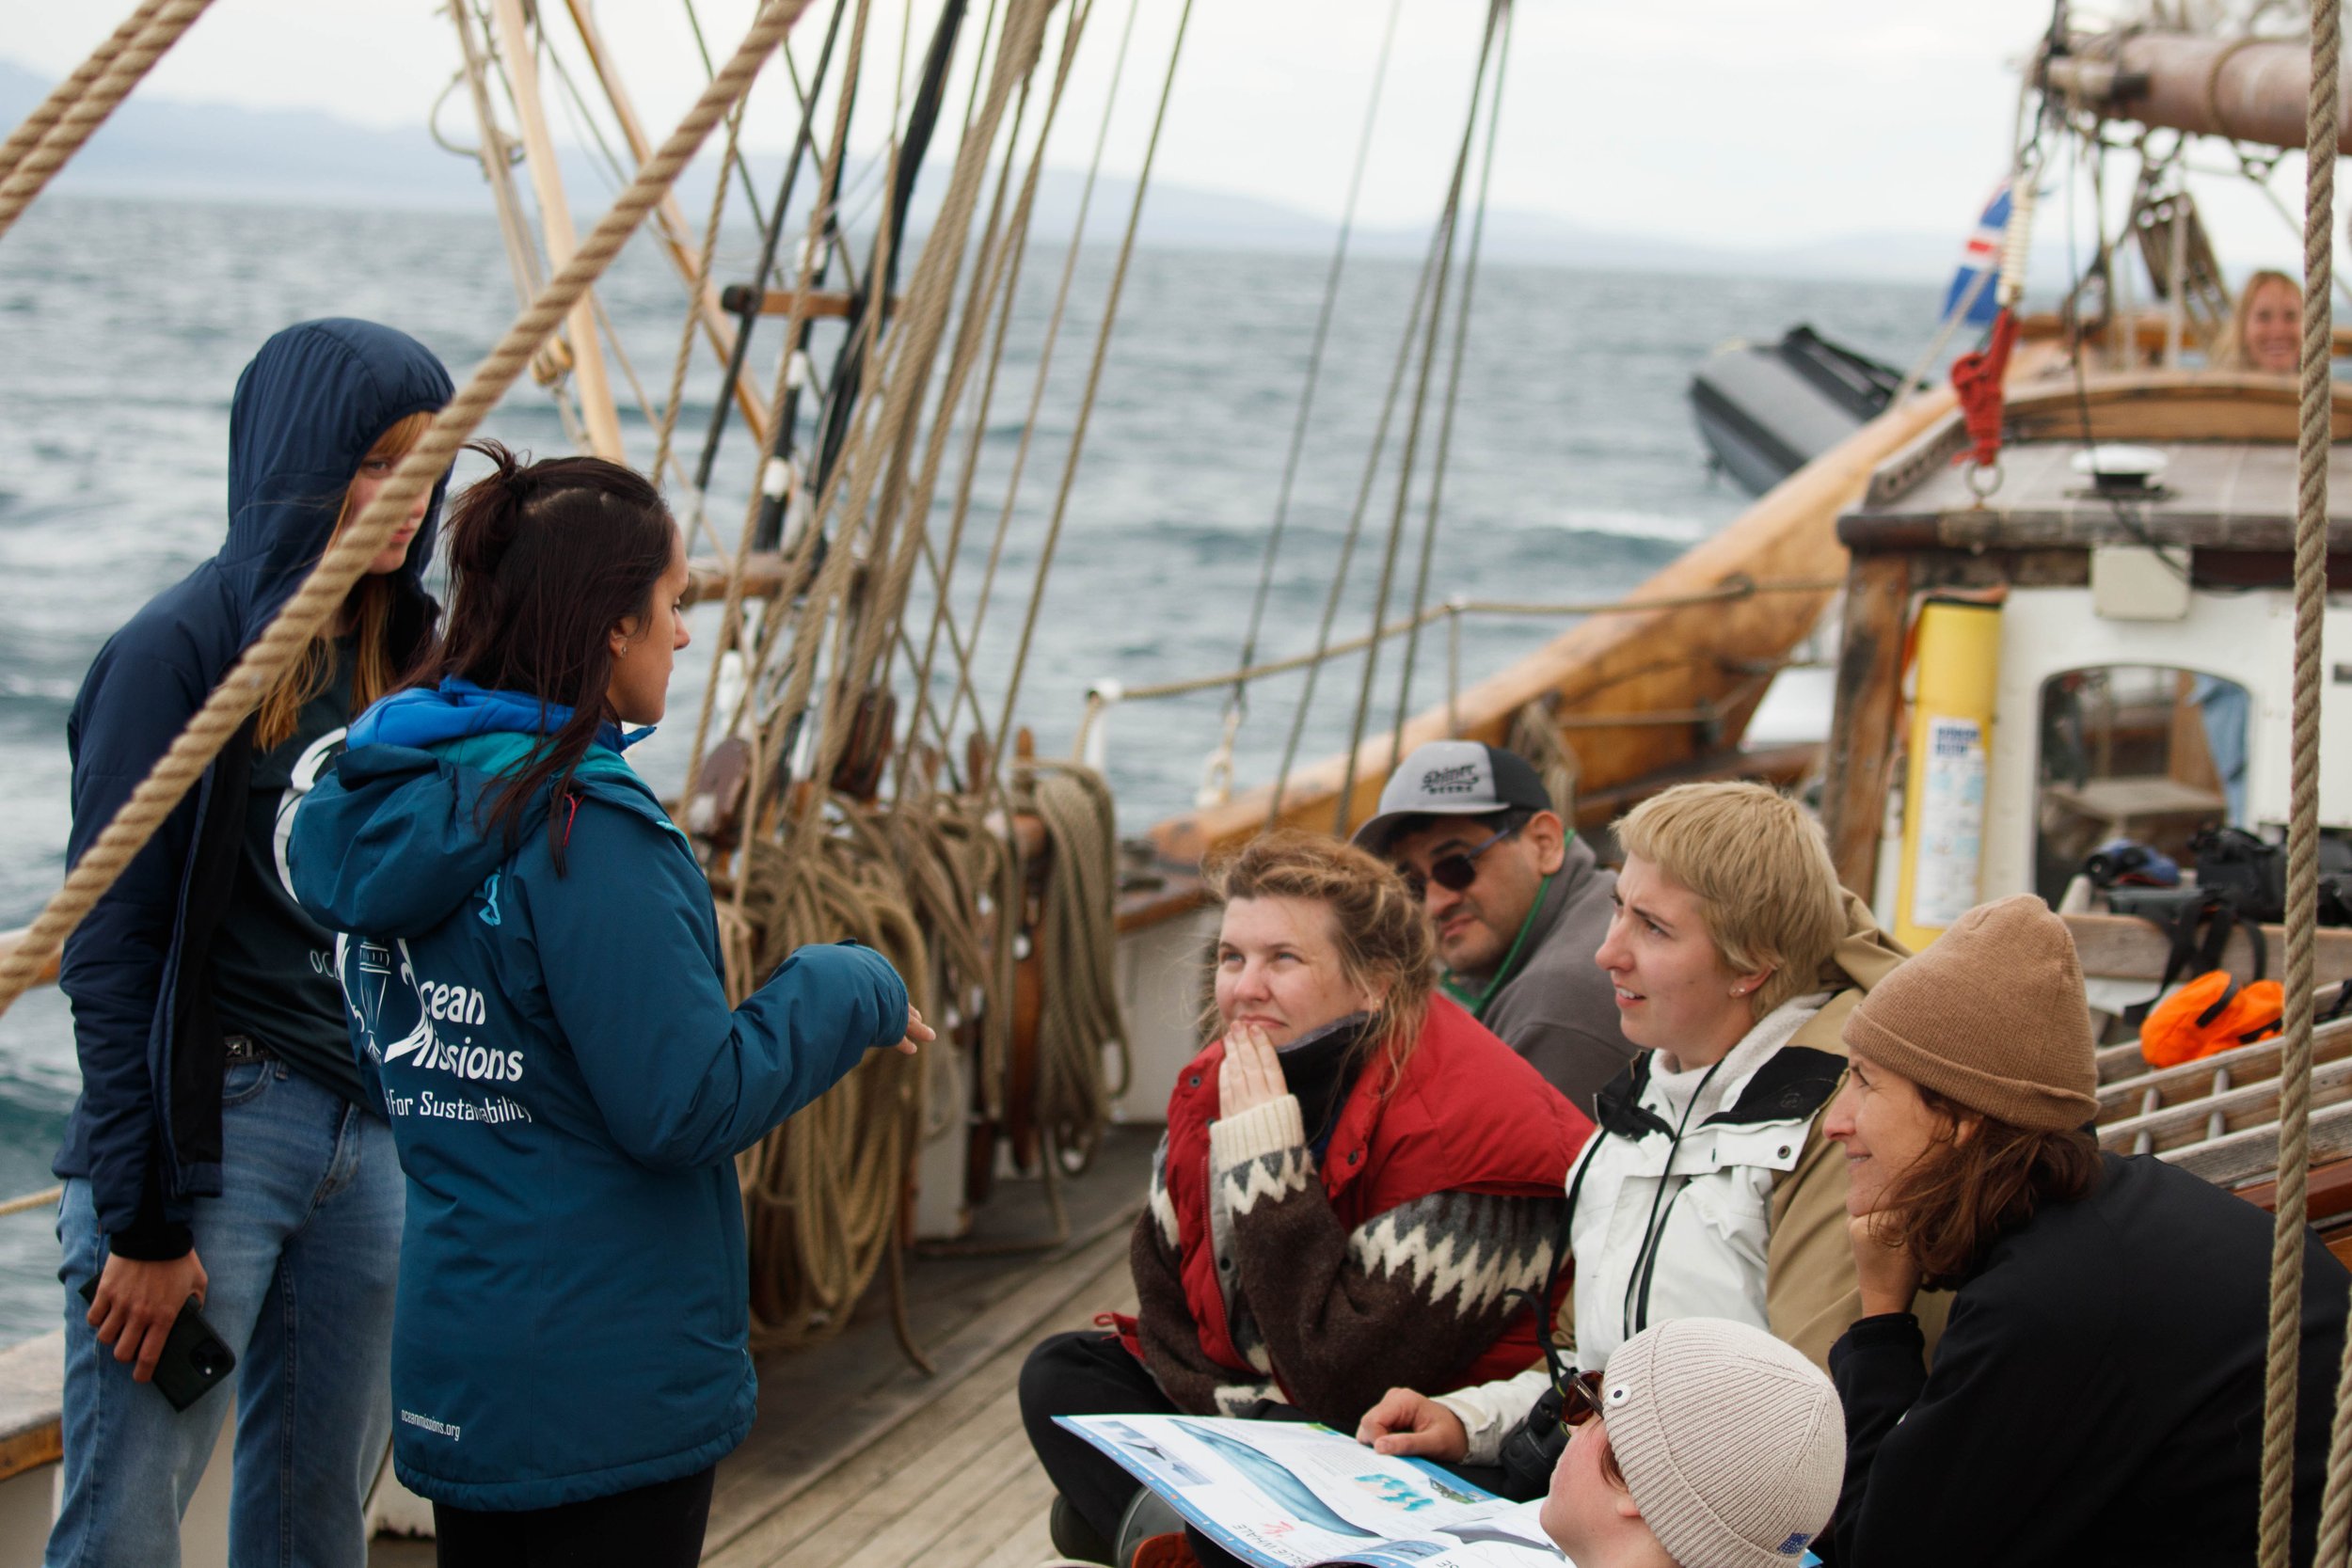  Learning about whales with Ocean Missions crew. ©Taime Smit Pellure 